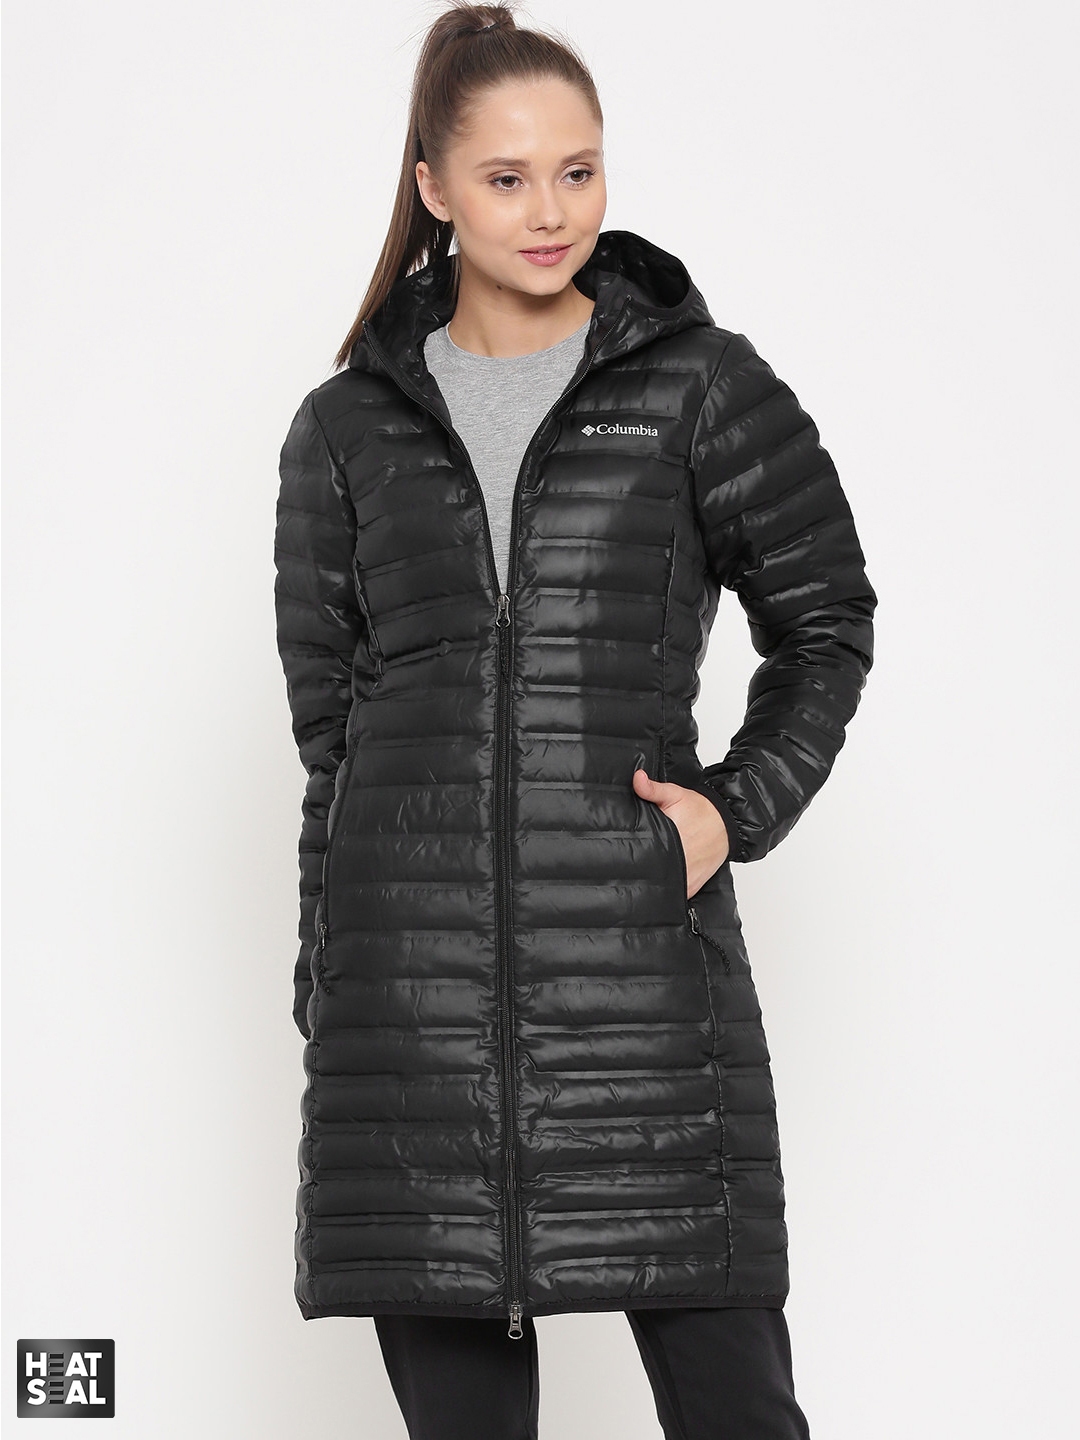 Belted Double Face Hooded Wrap Coat –